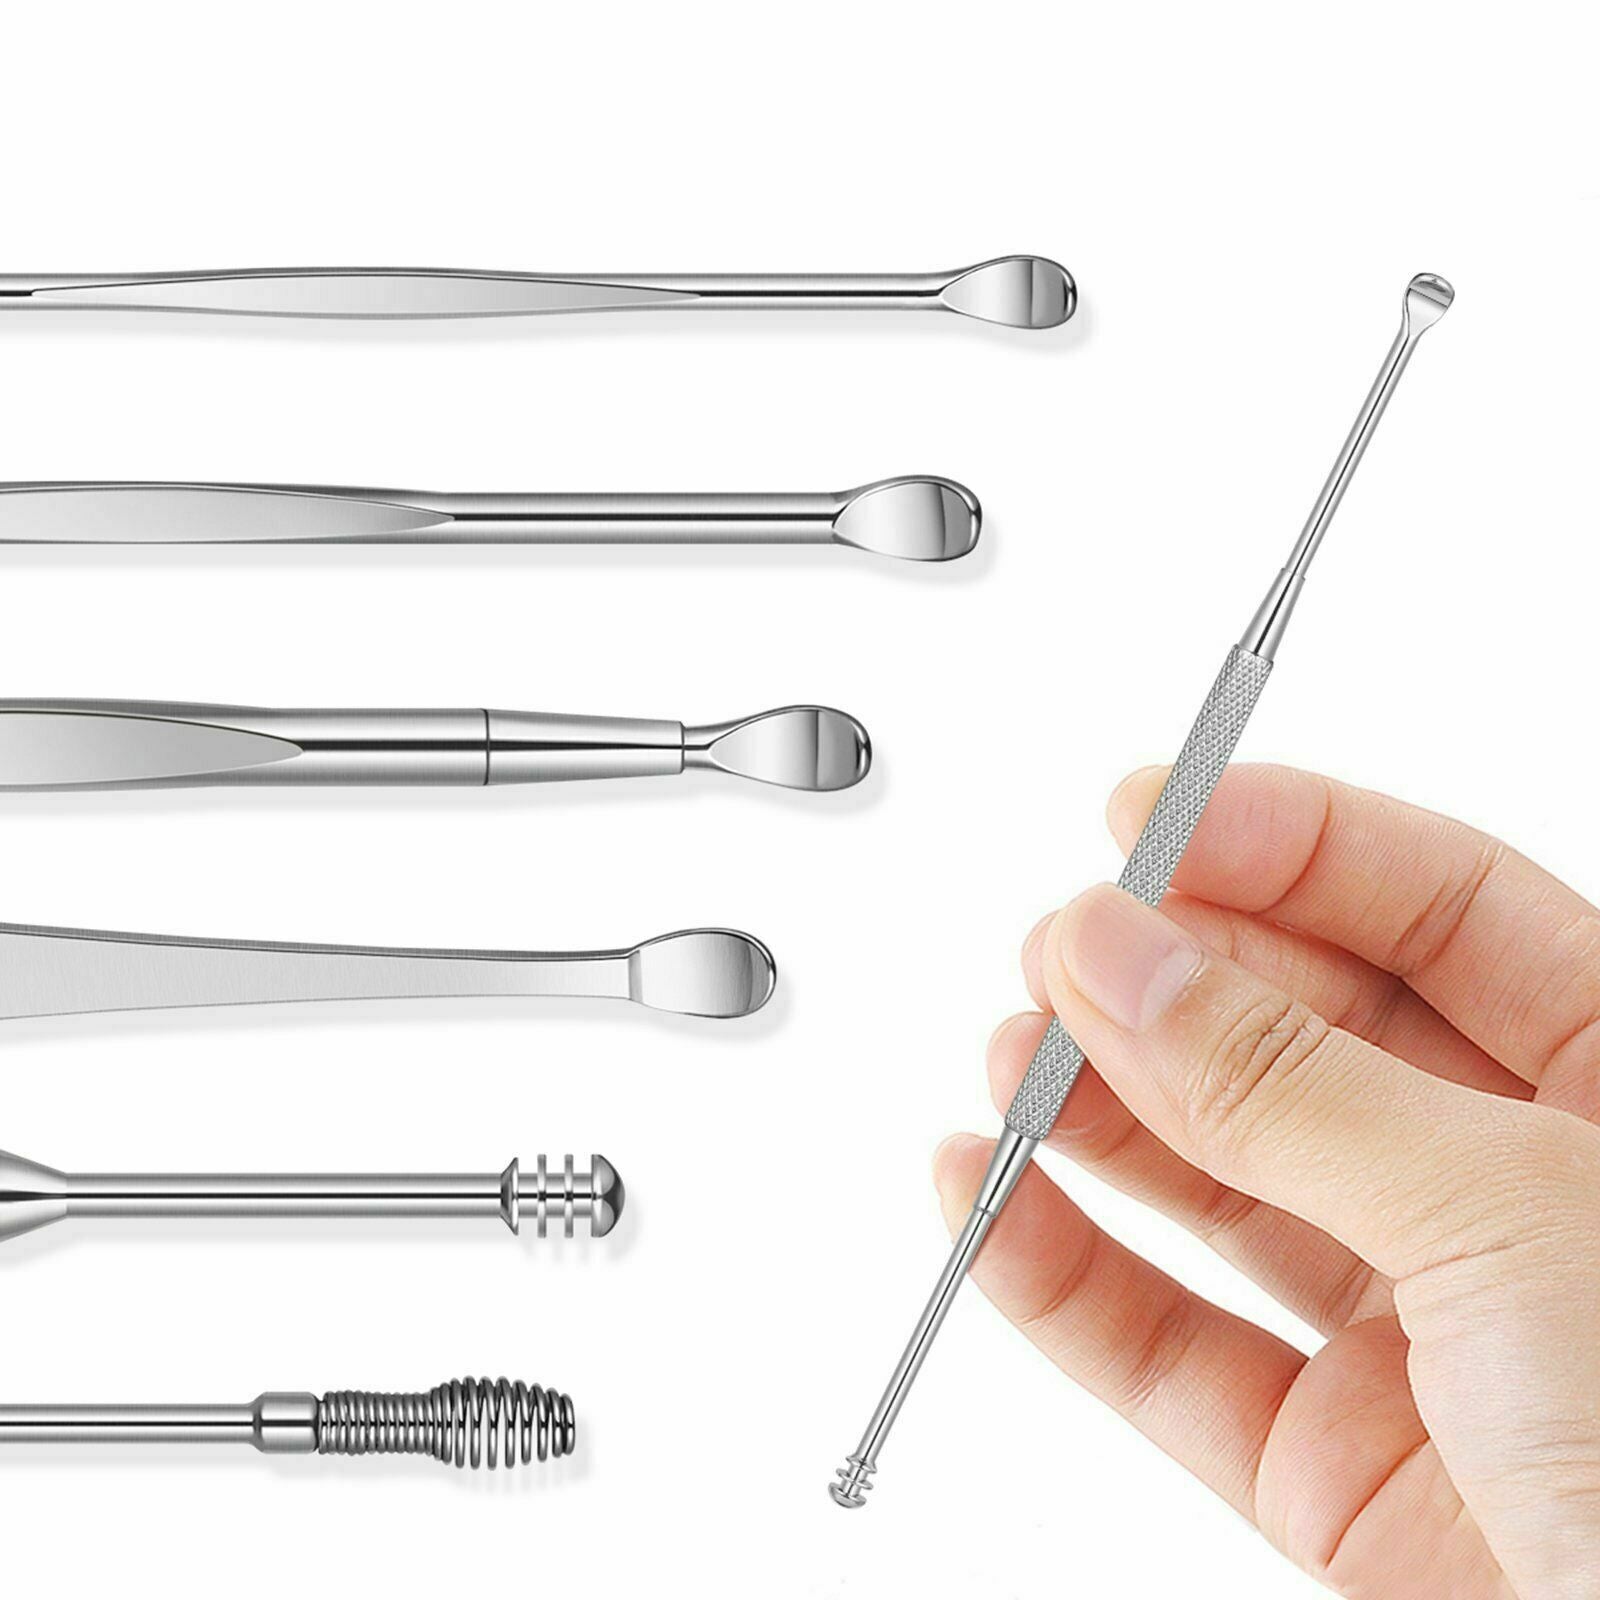 6pcs Stainless Steel Ear Pick Wax Cleaner